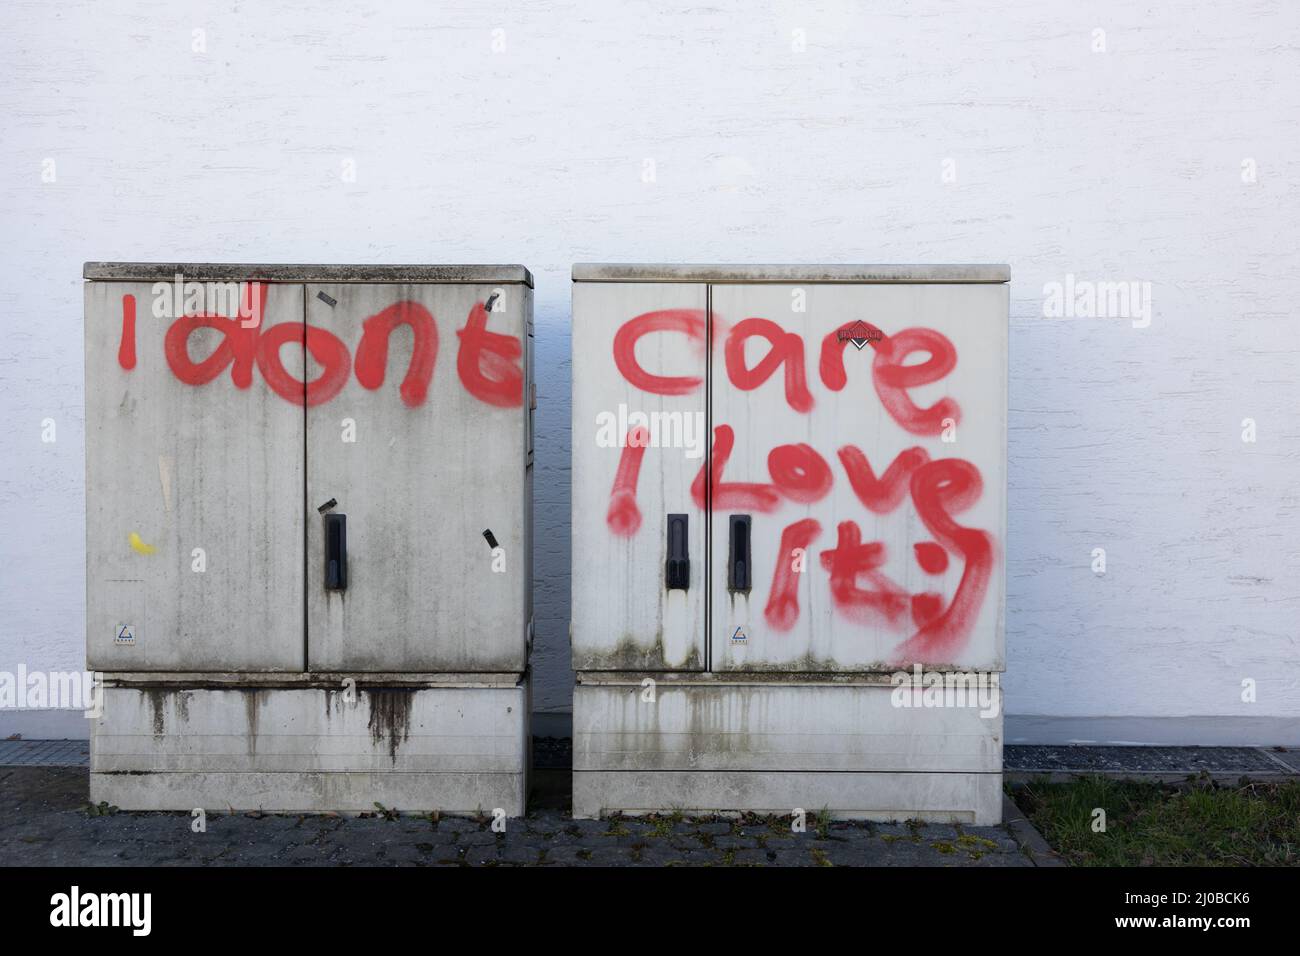 Regensburg, Germany - 9th of March 2022: I don't care i love it red writing on the wall. High quality photo Stock Photo